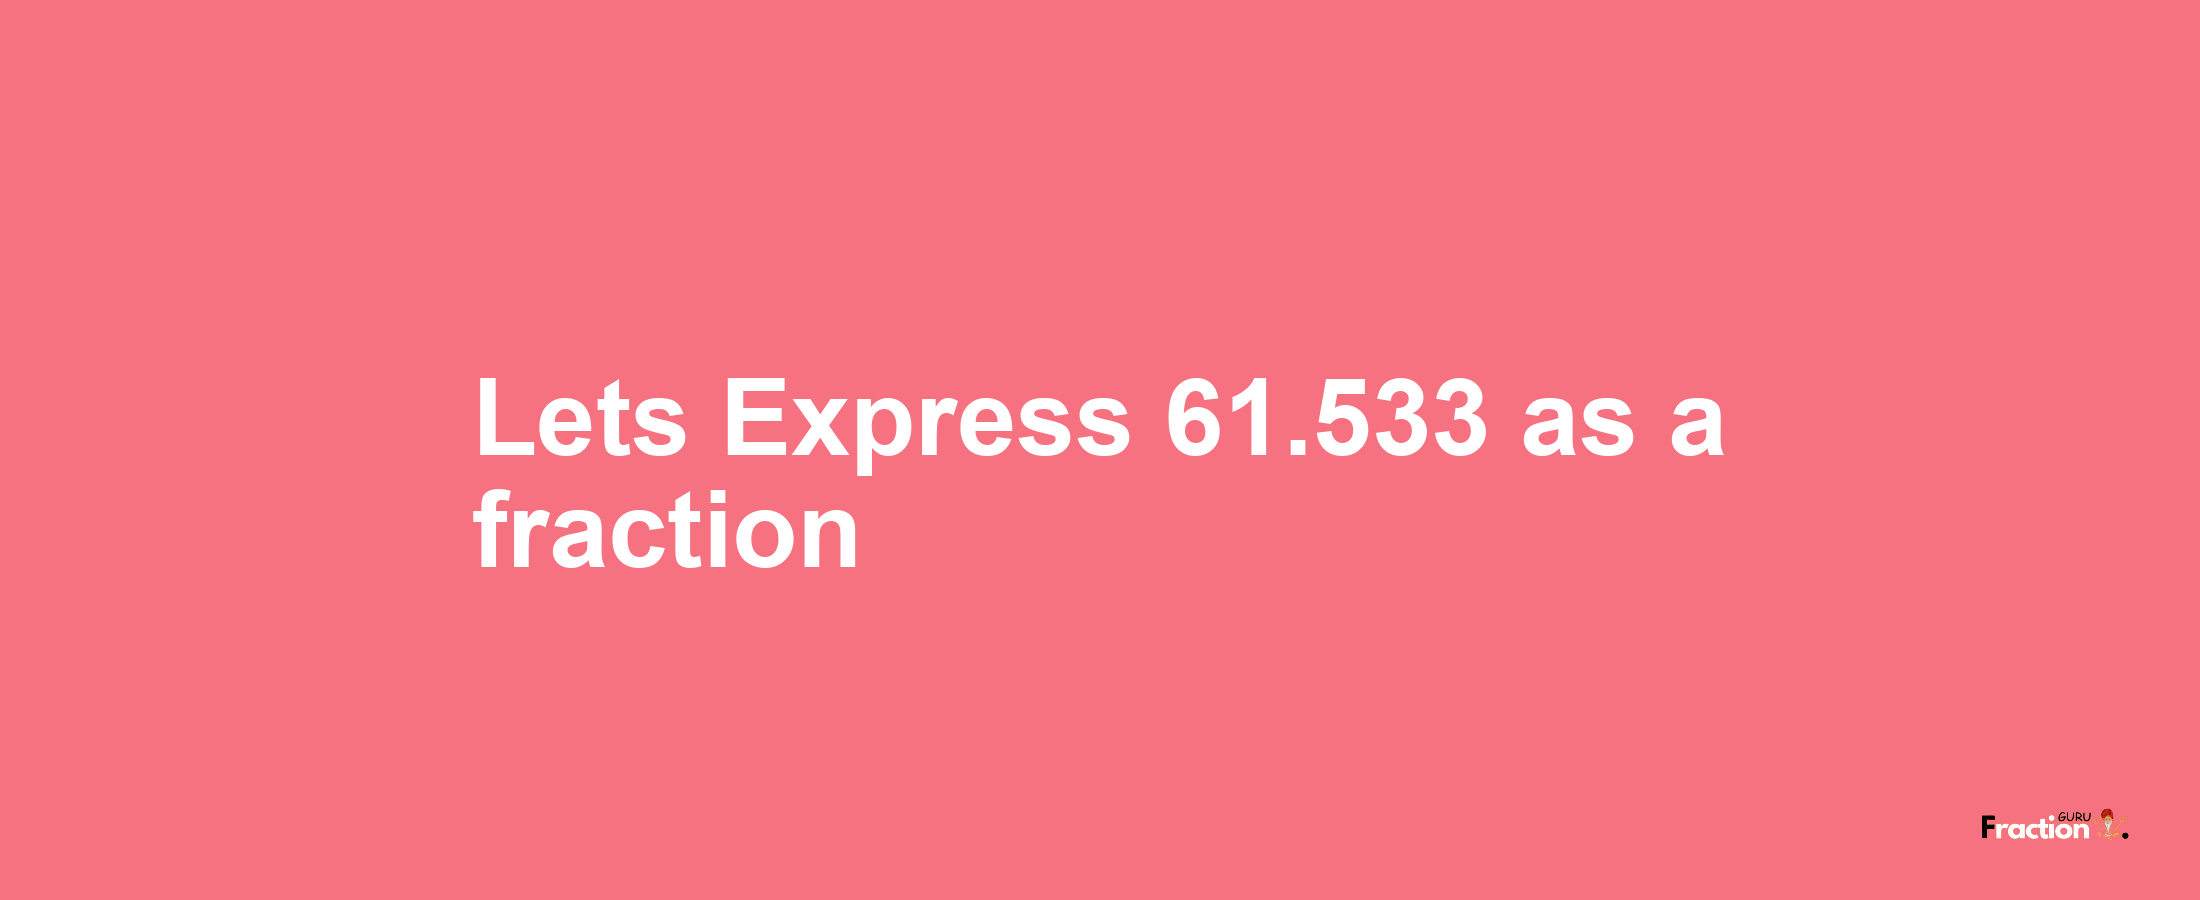 Lets Express 61.533 as afraction